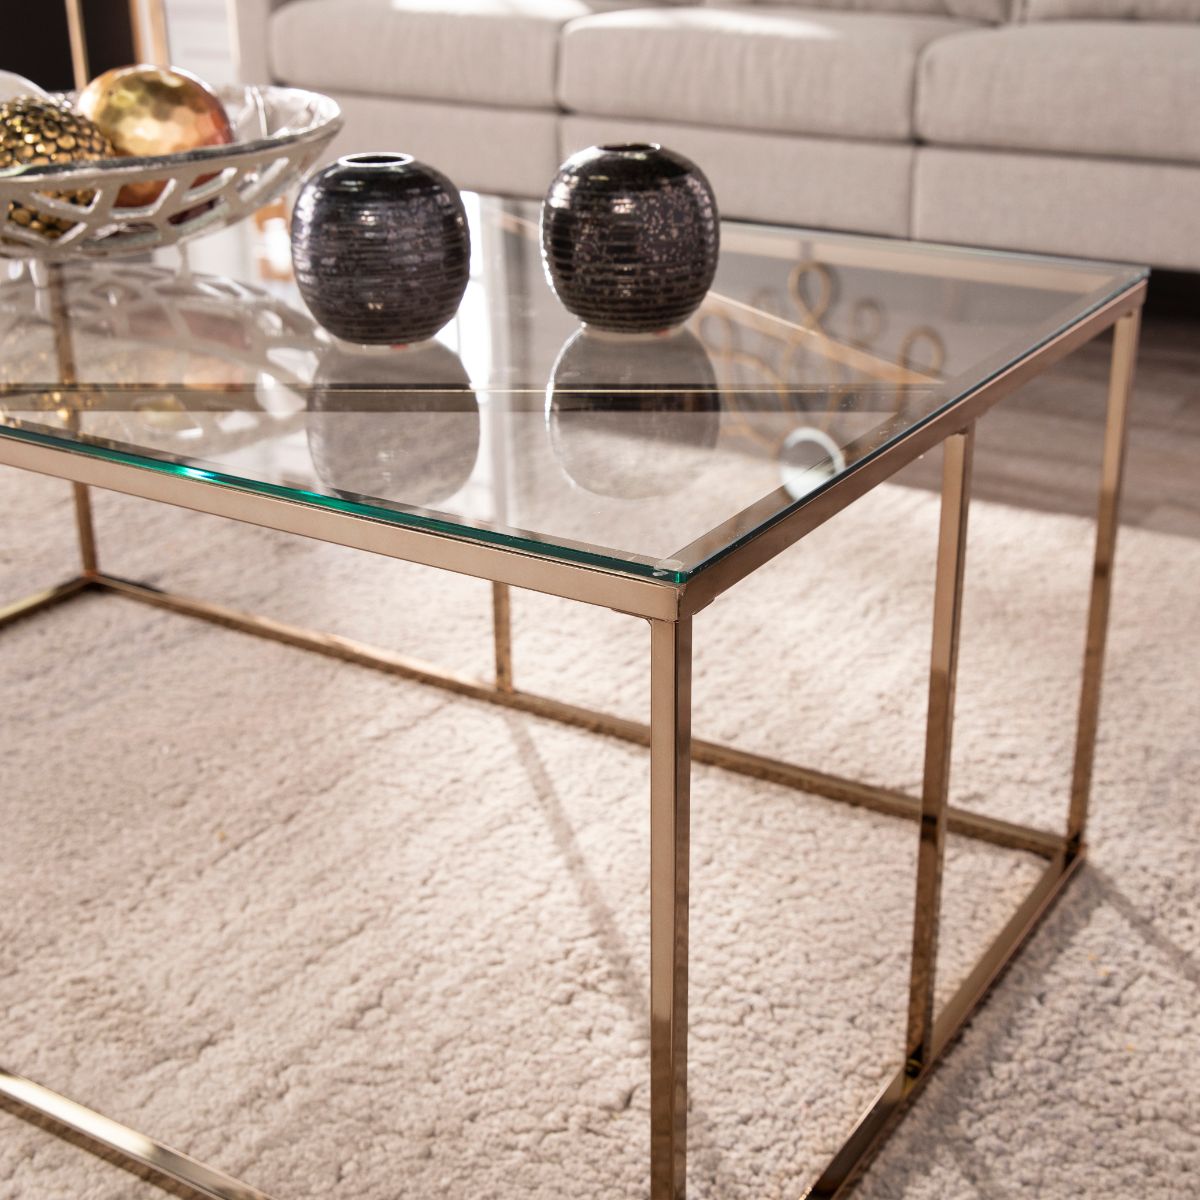 42" Gold and Black Contemporary Style Rectangular Glass Top Cocktail Table - image 3 of 4